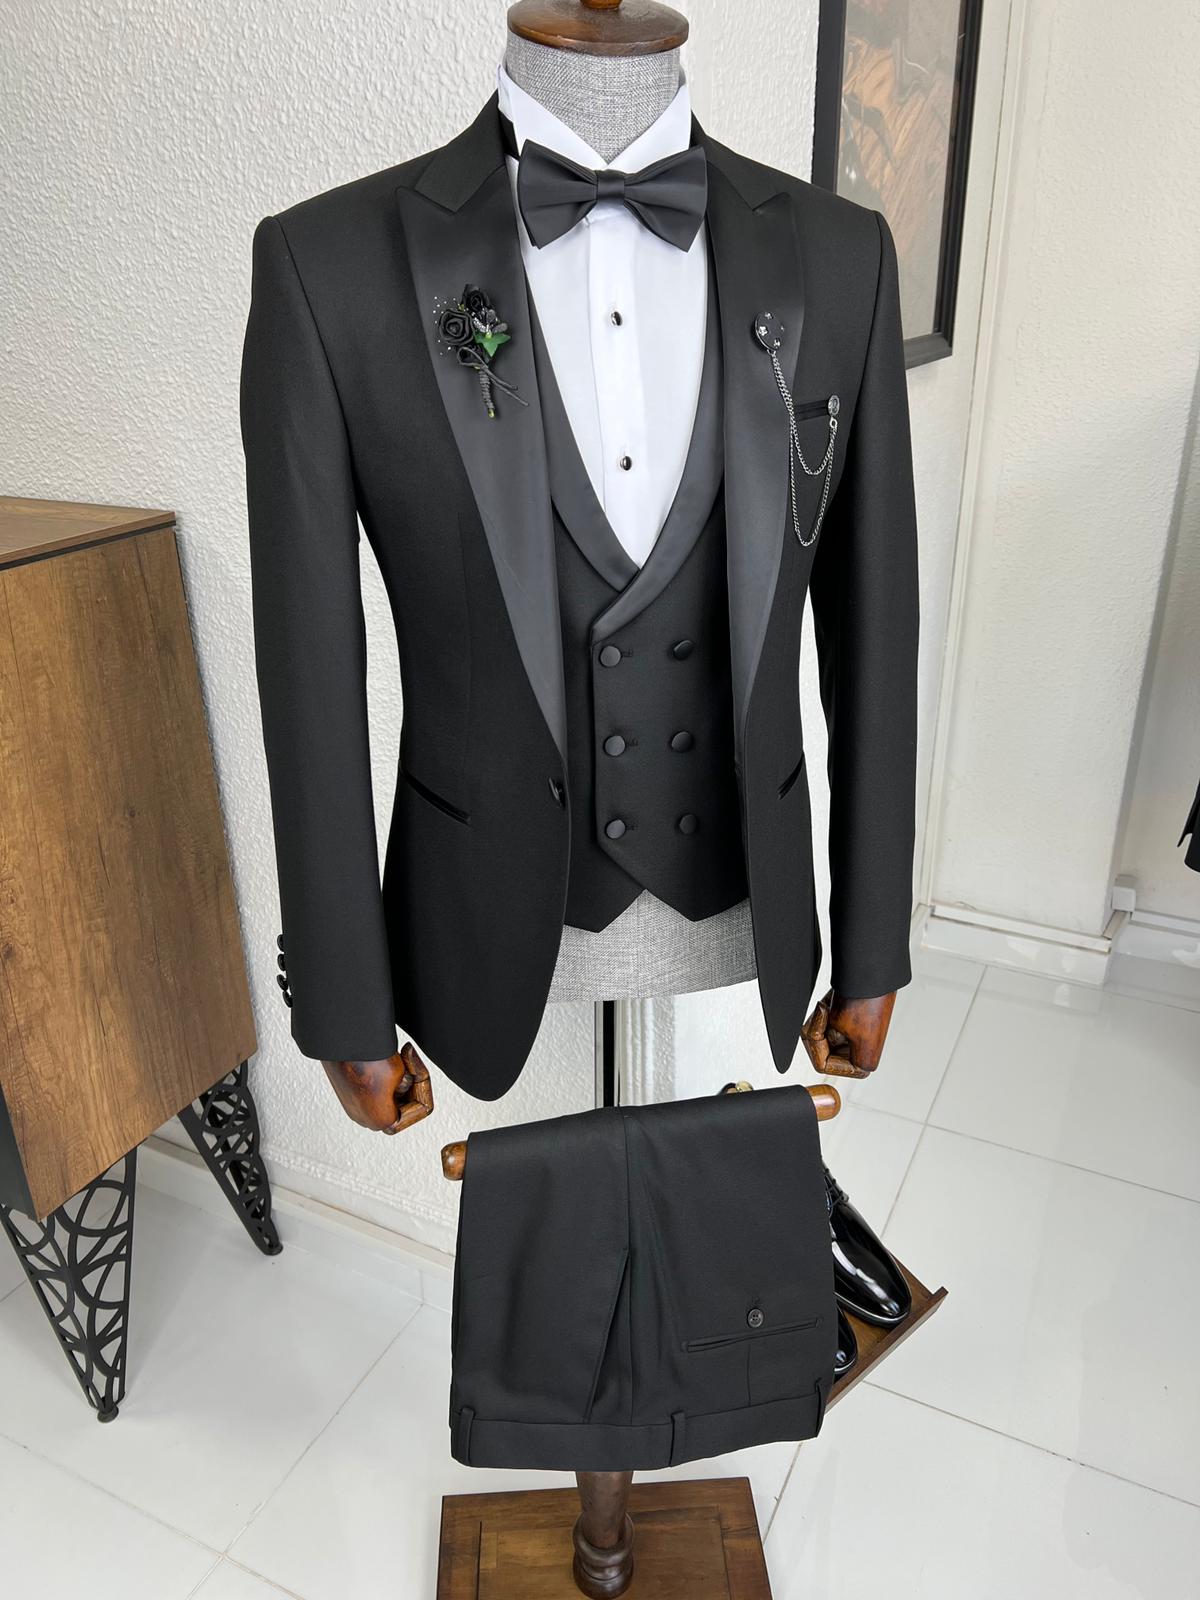 Luxe Slim Fit Dovetail Collared Black Tuxedo